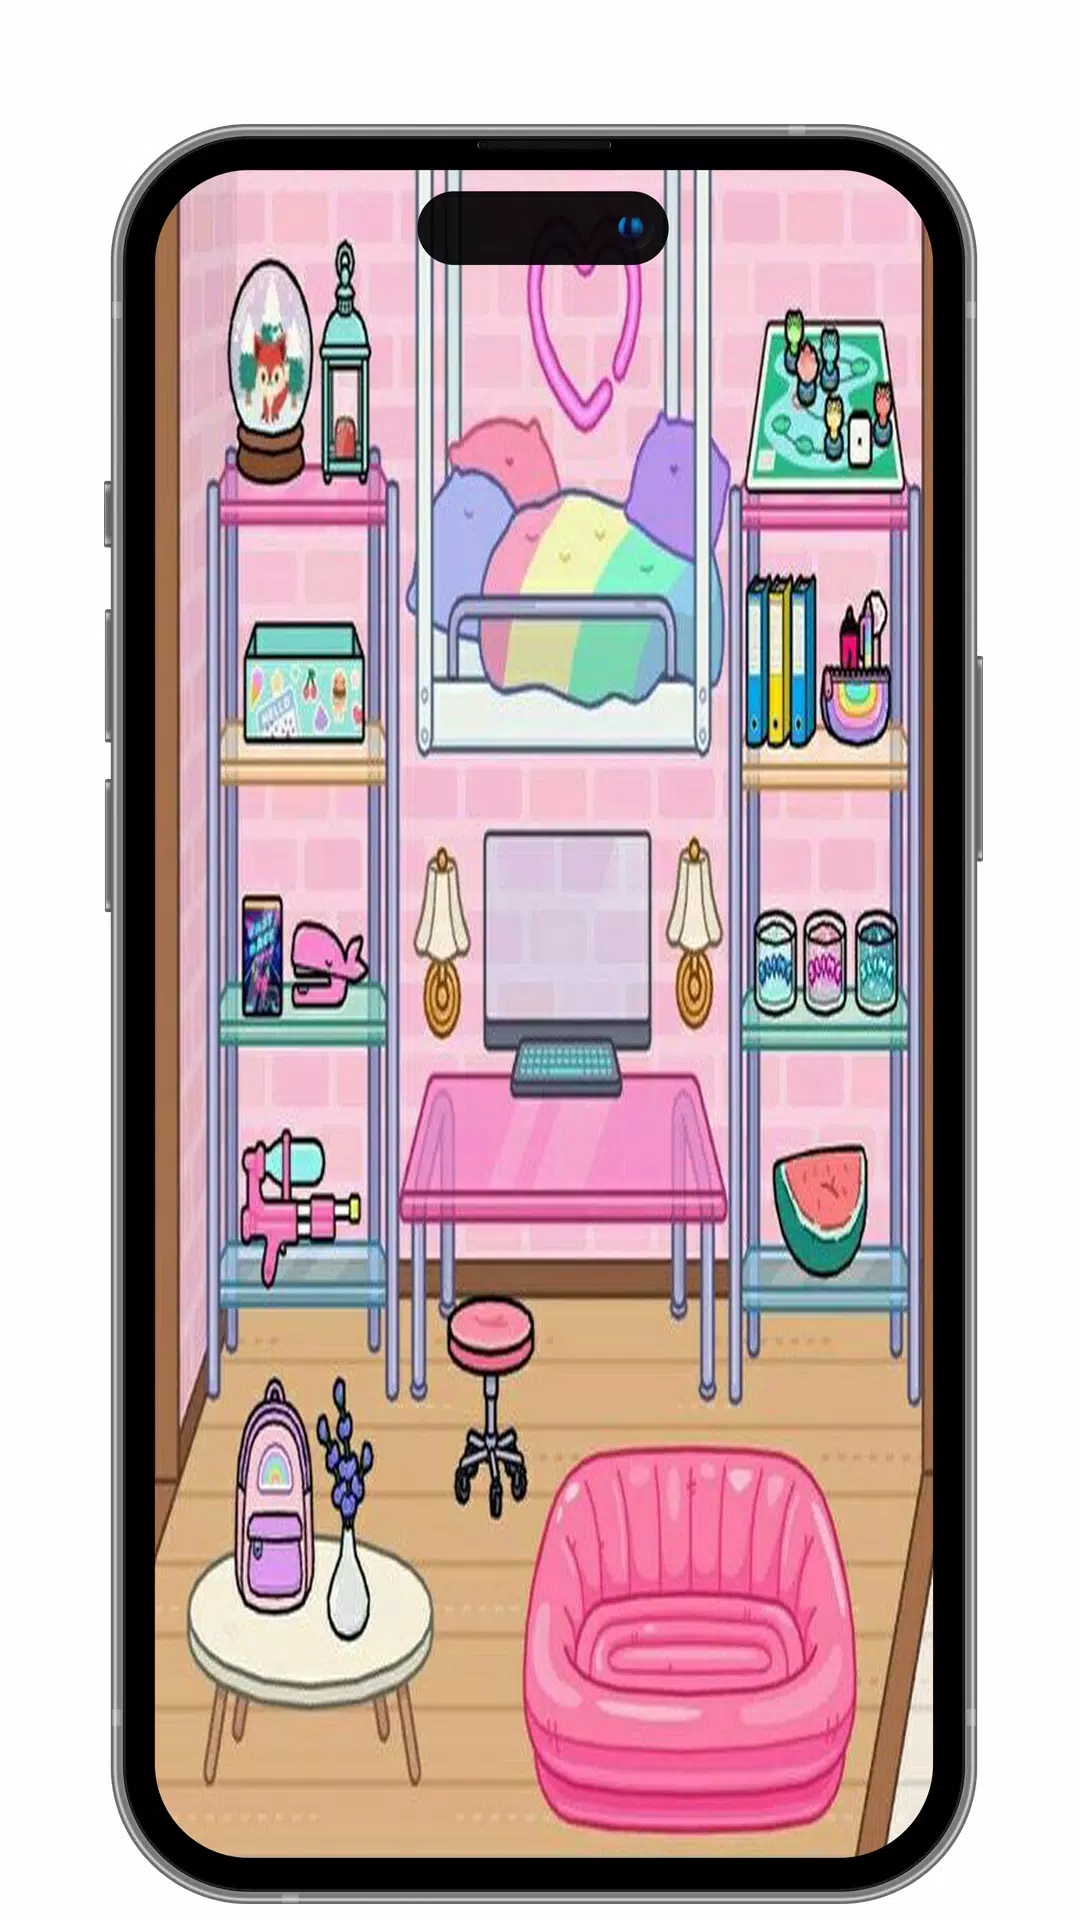 just some toca boca room idea's for my girlies~~♡, Gallery posted by luna